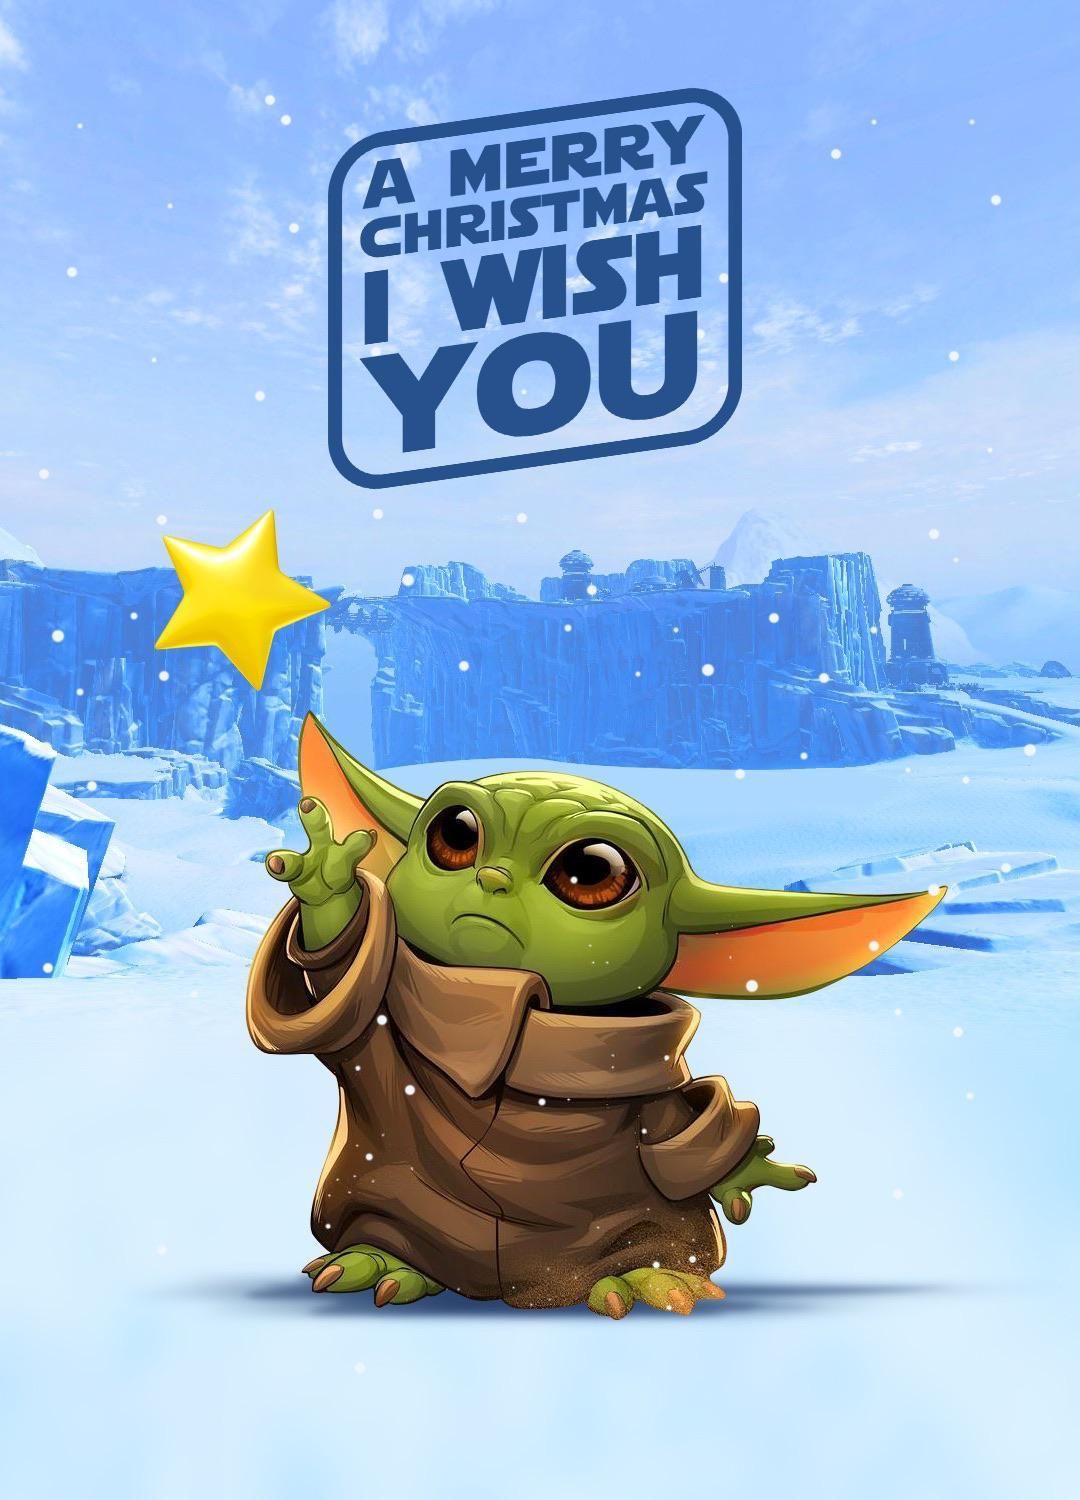 A Merry Christmas I Wish You. R BabyYoda. Baby Yoda In 2020. Star Wars Drawings, Star Wars Picture, Star Wars Christmas